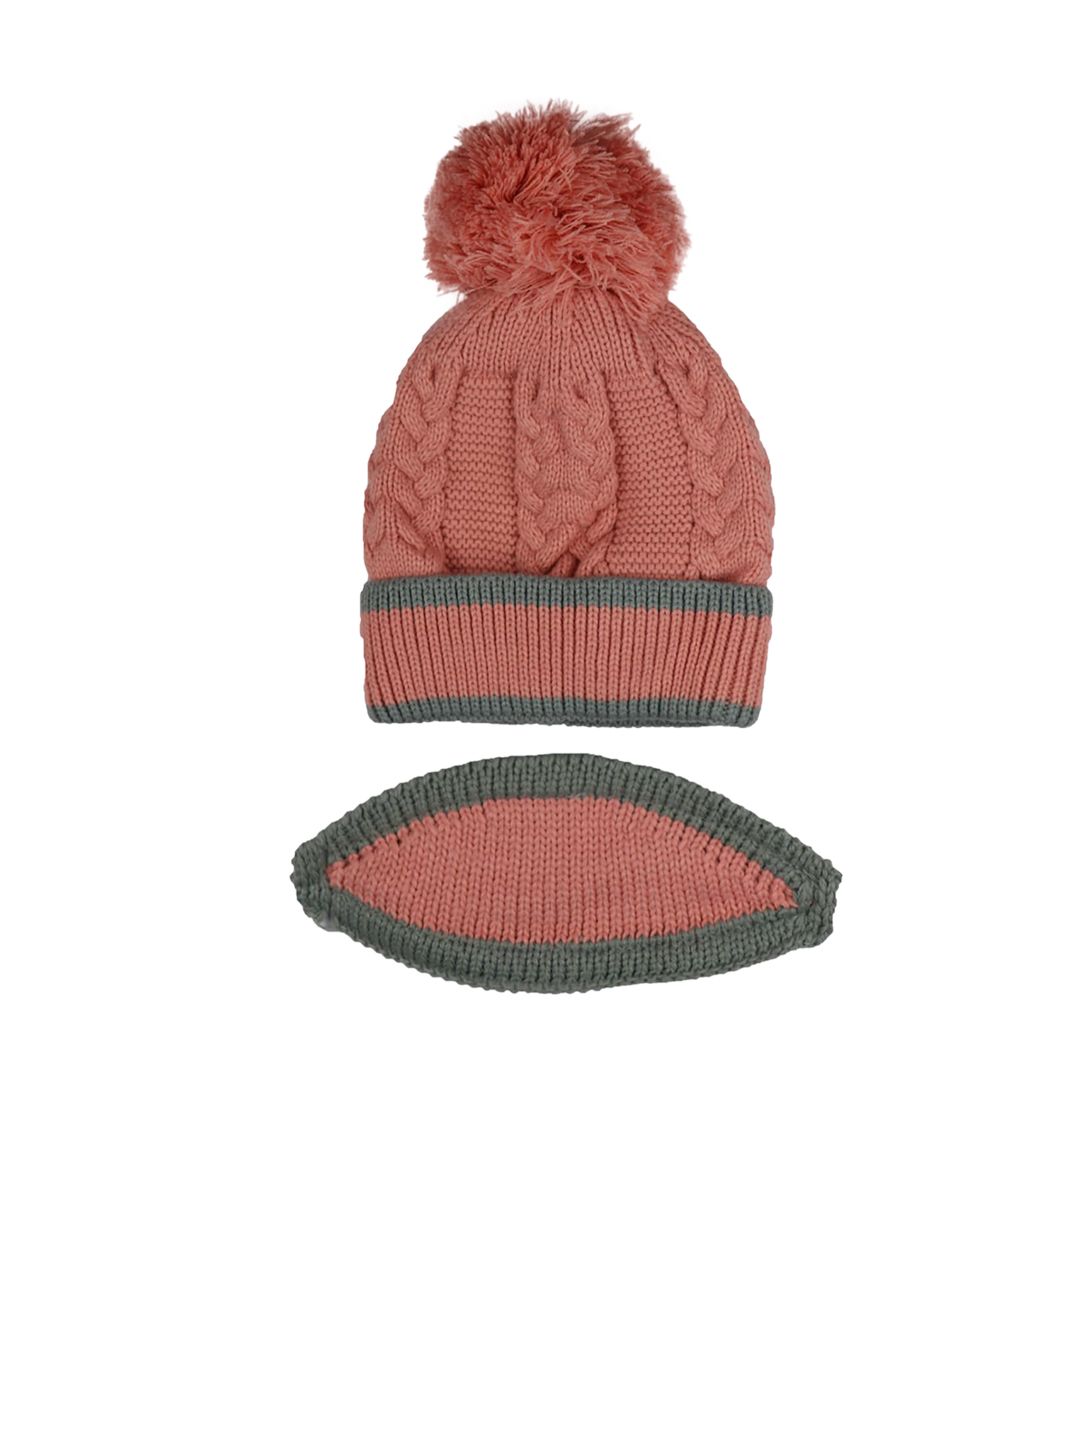 iSWEVEN Unisex Pink Self-Design Woven Expandable Beanie Price in India